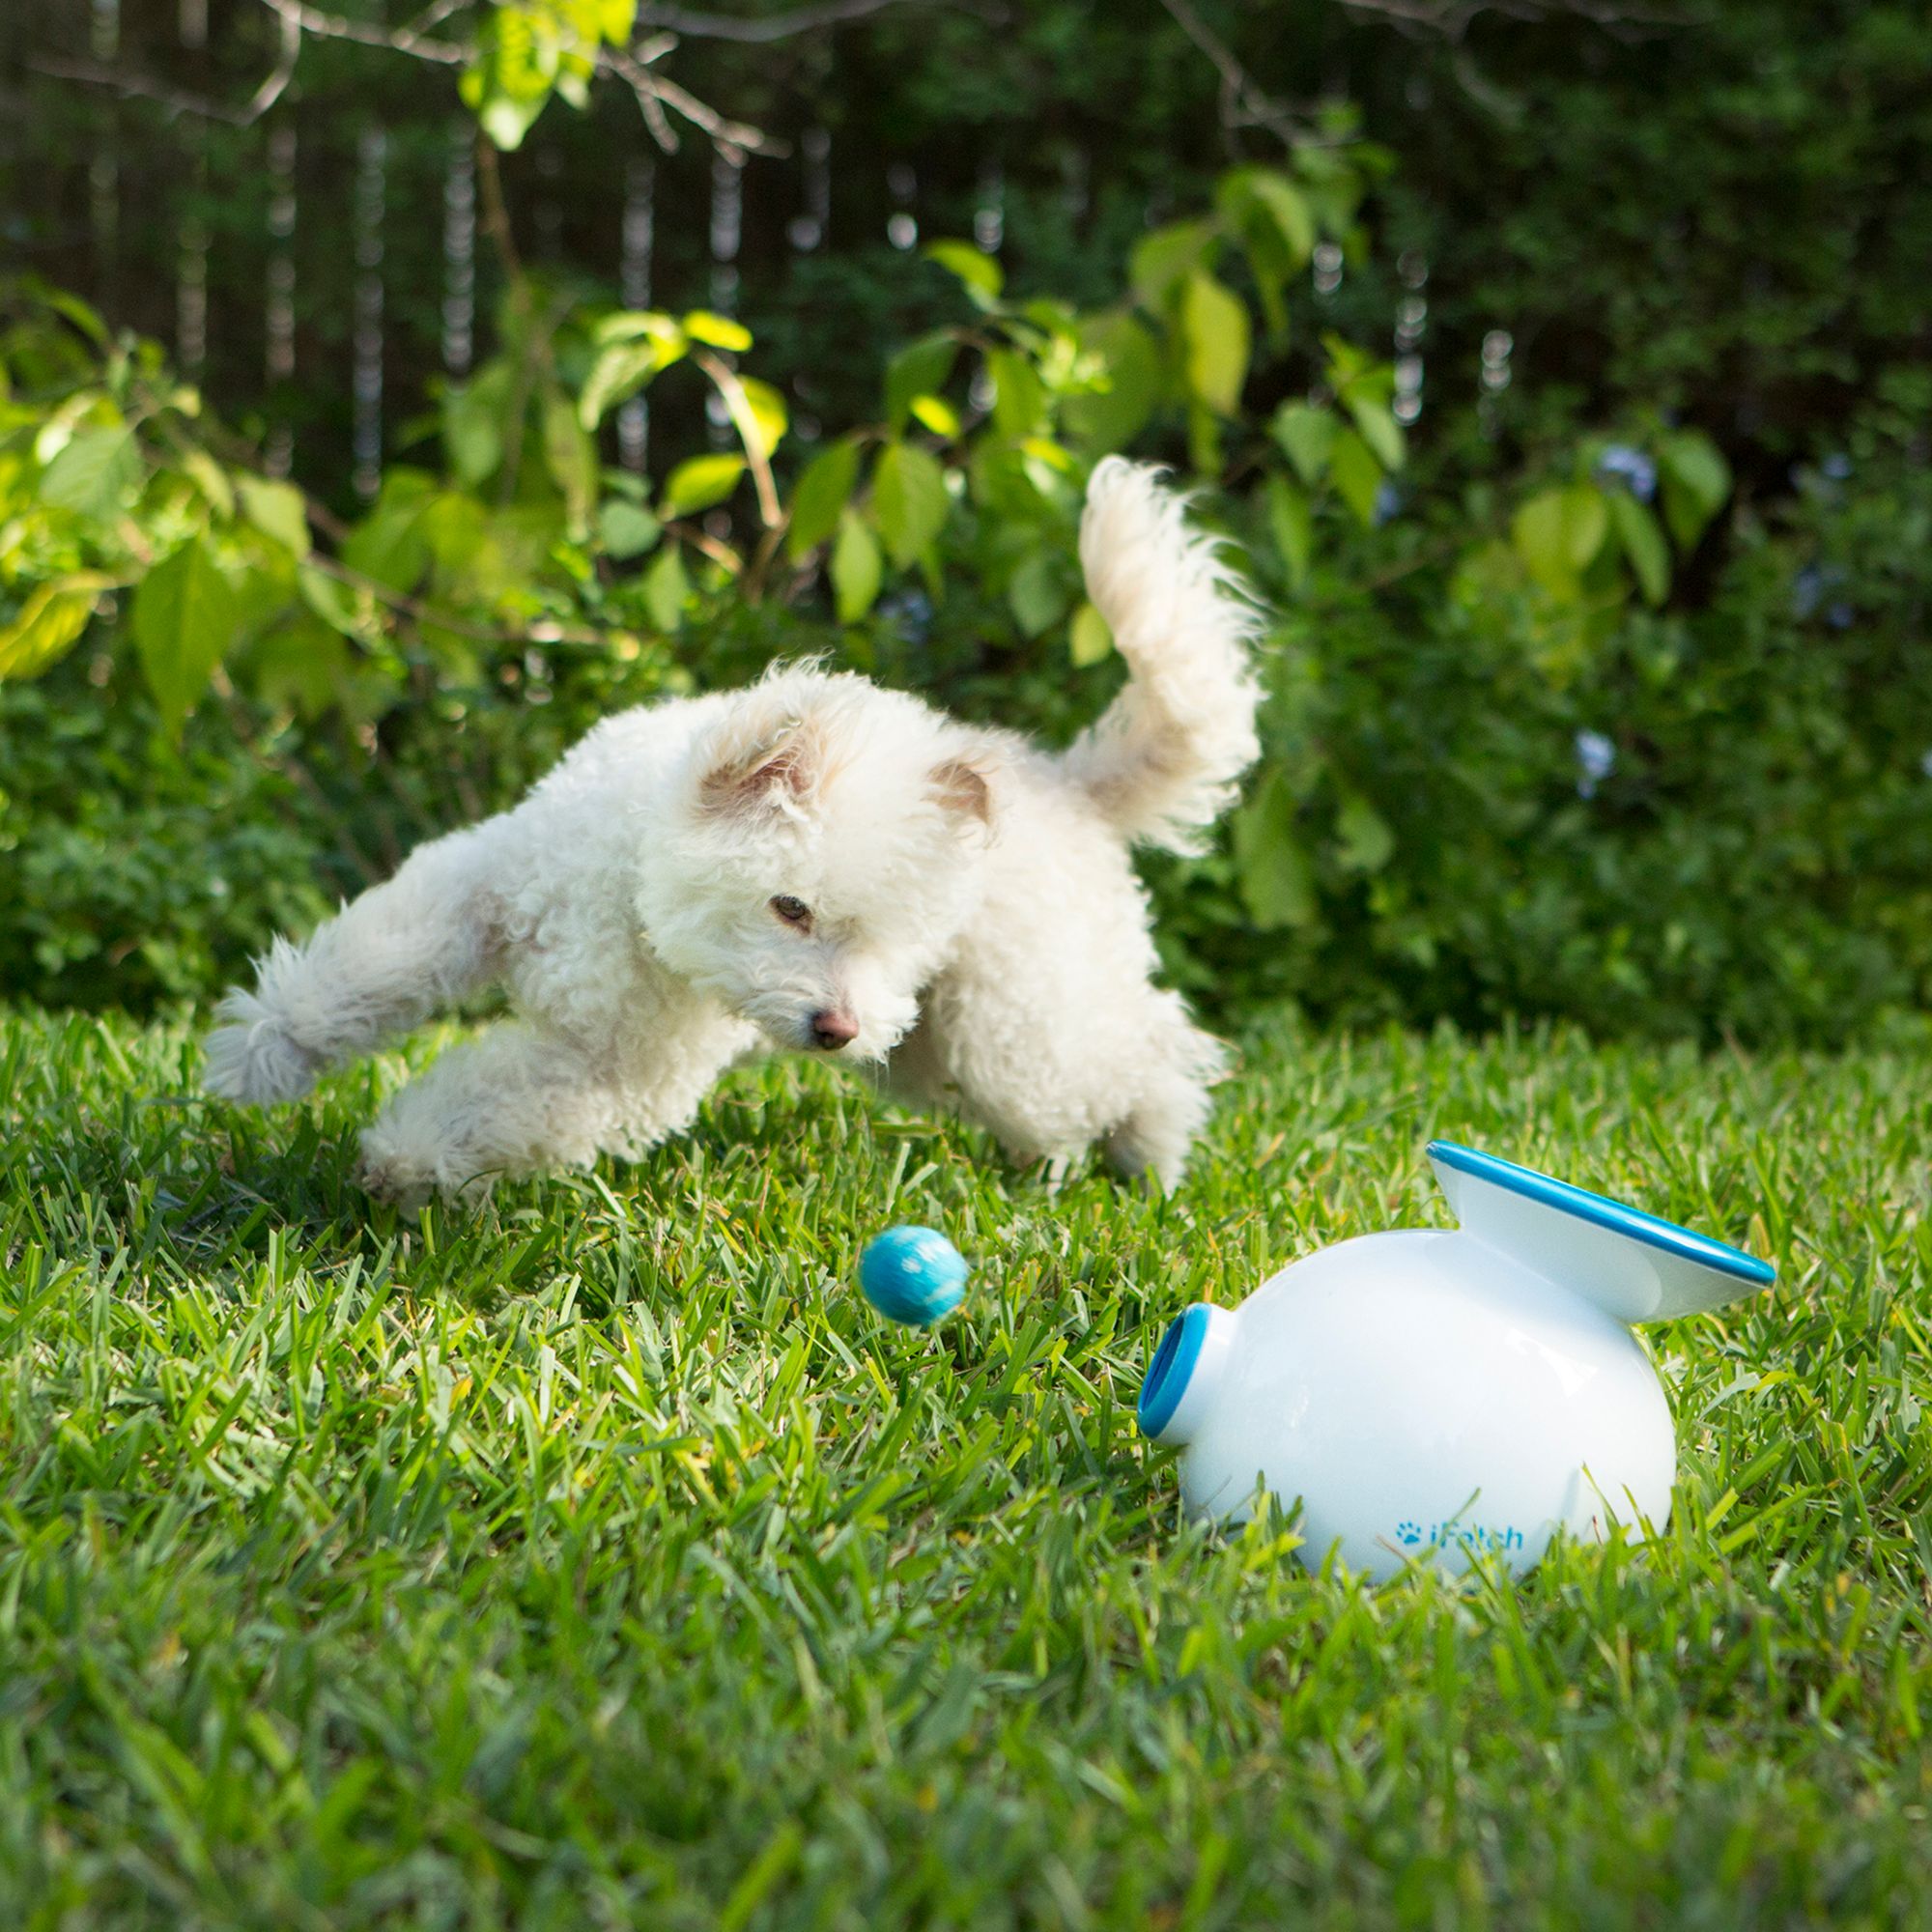 ifetch interactive ball launchers for dogs